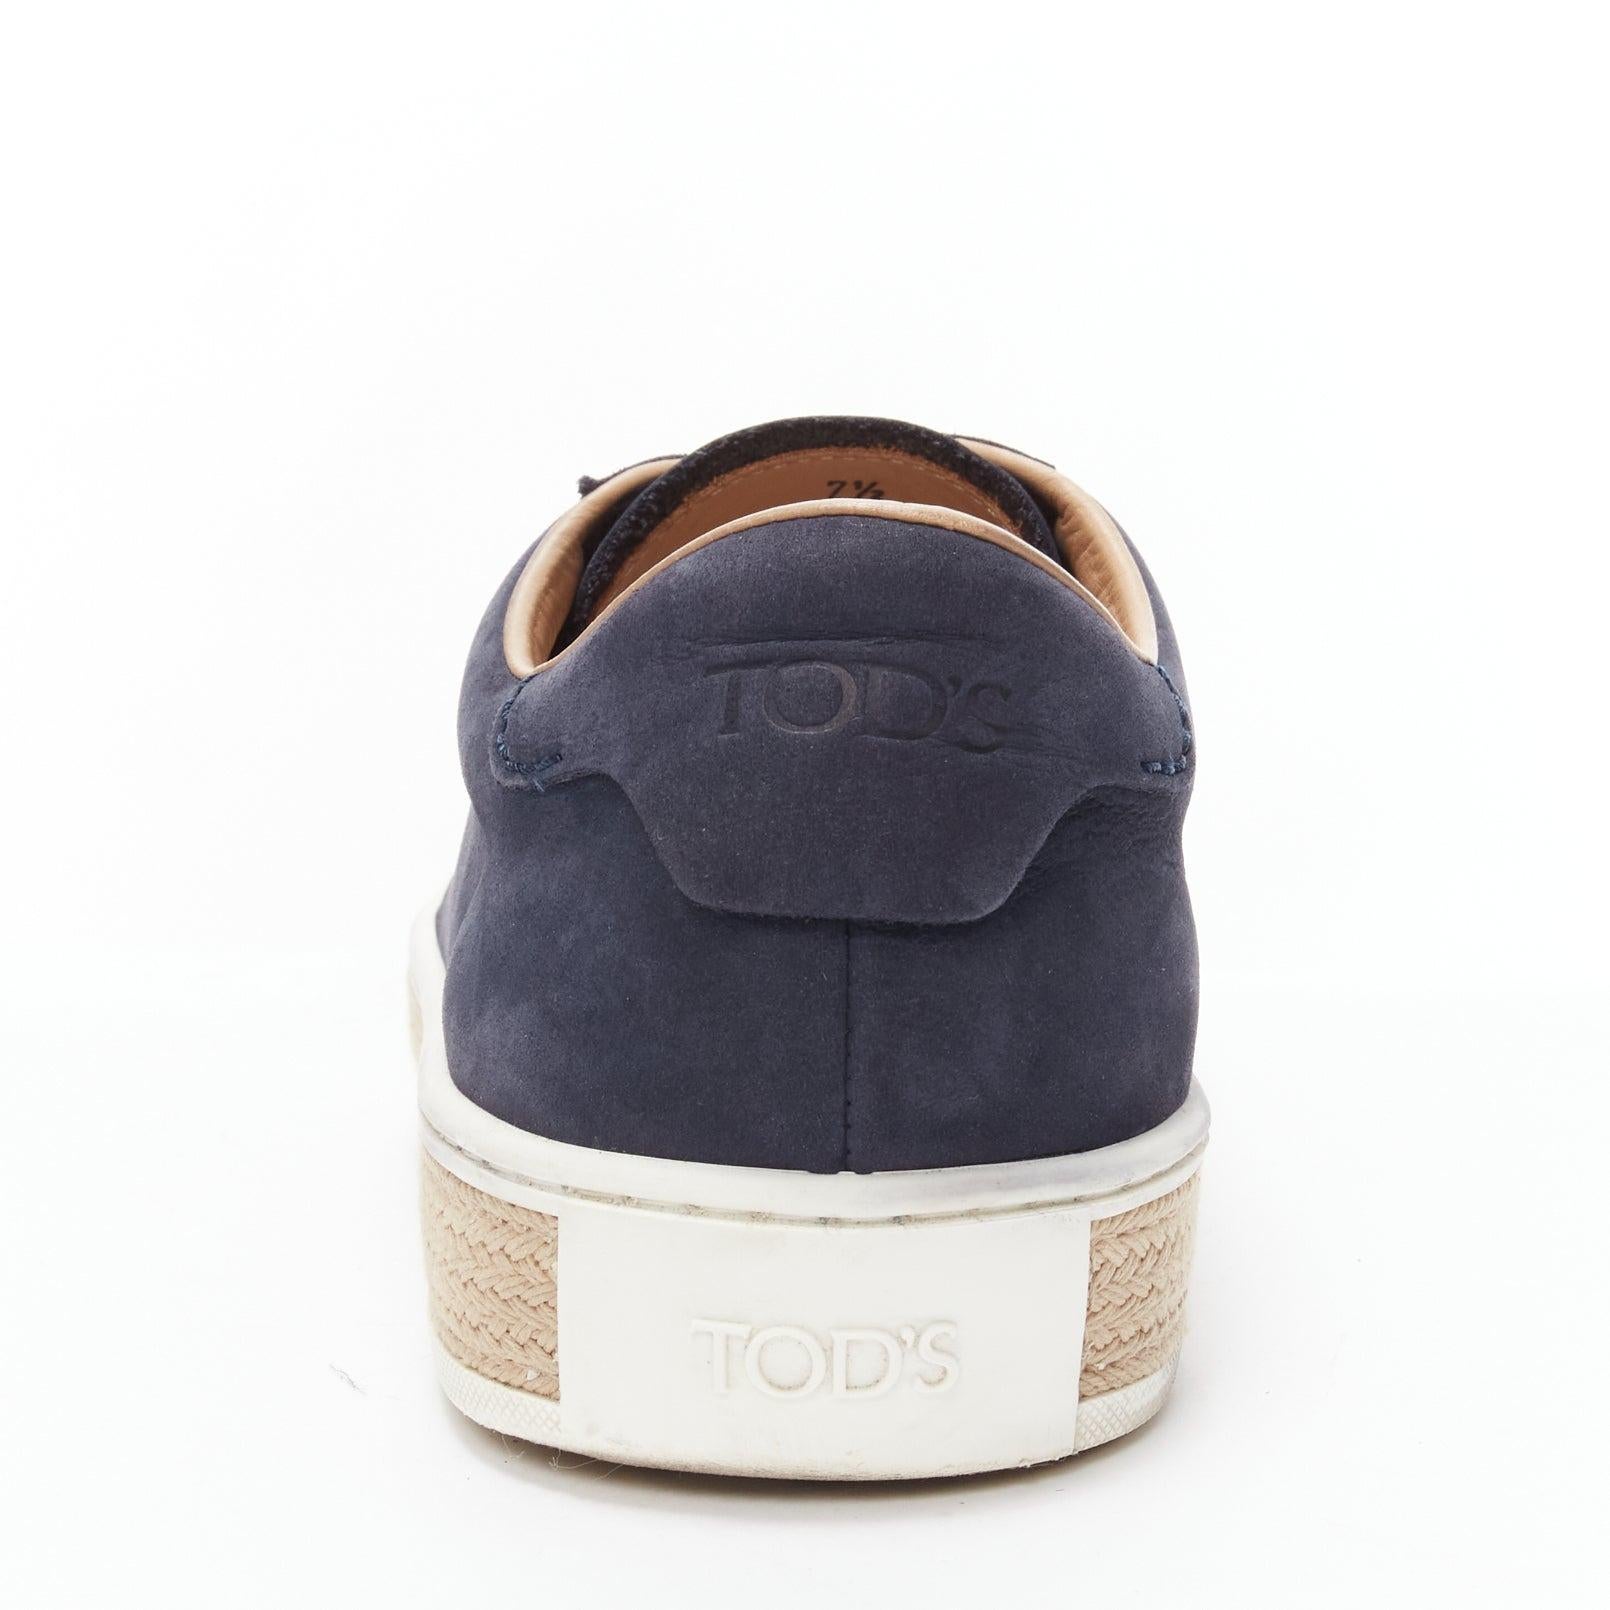 TOD'S navy suede leather espadrille sole low top sneakers UK7.5 EU41.5 3